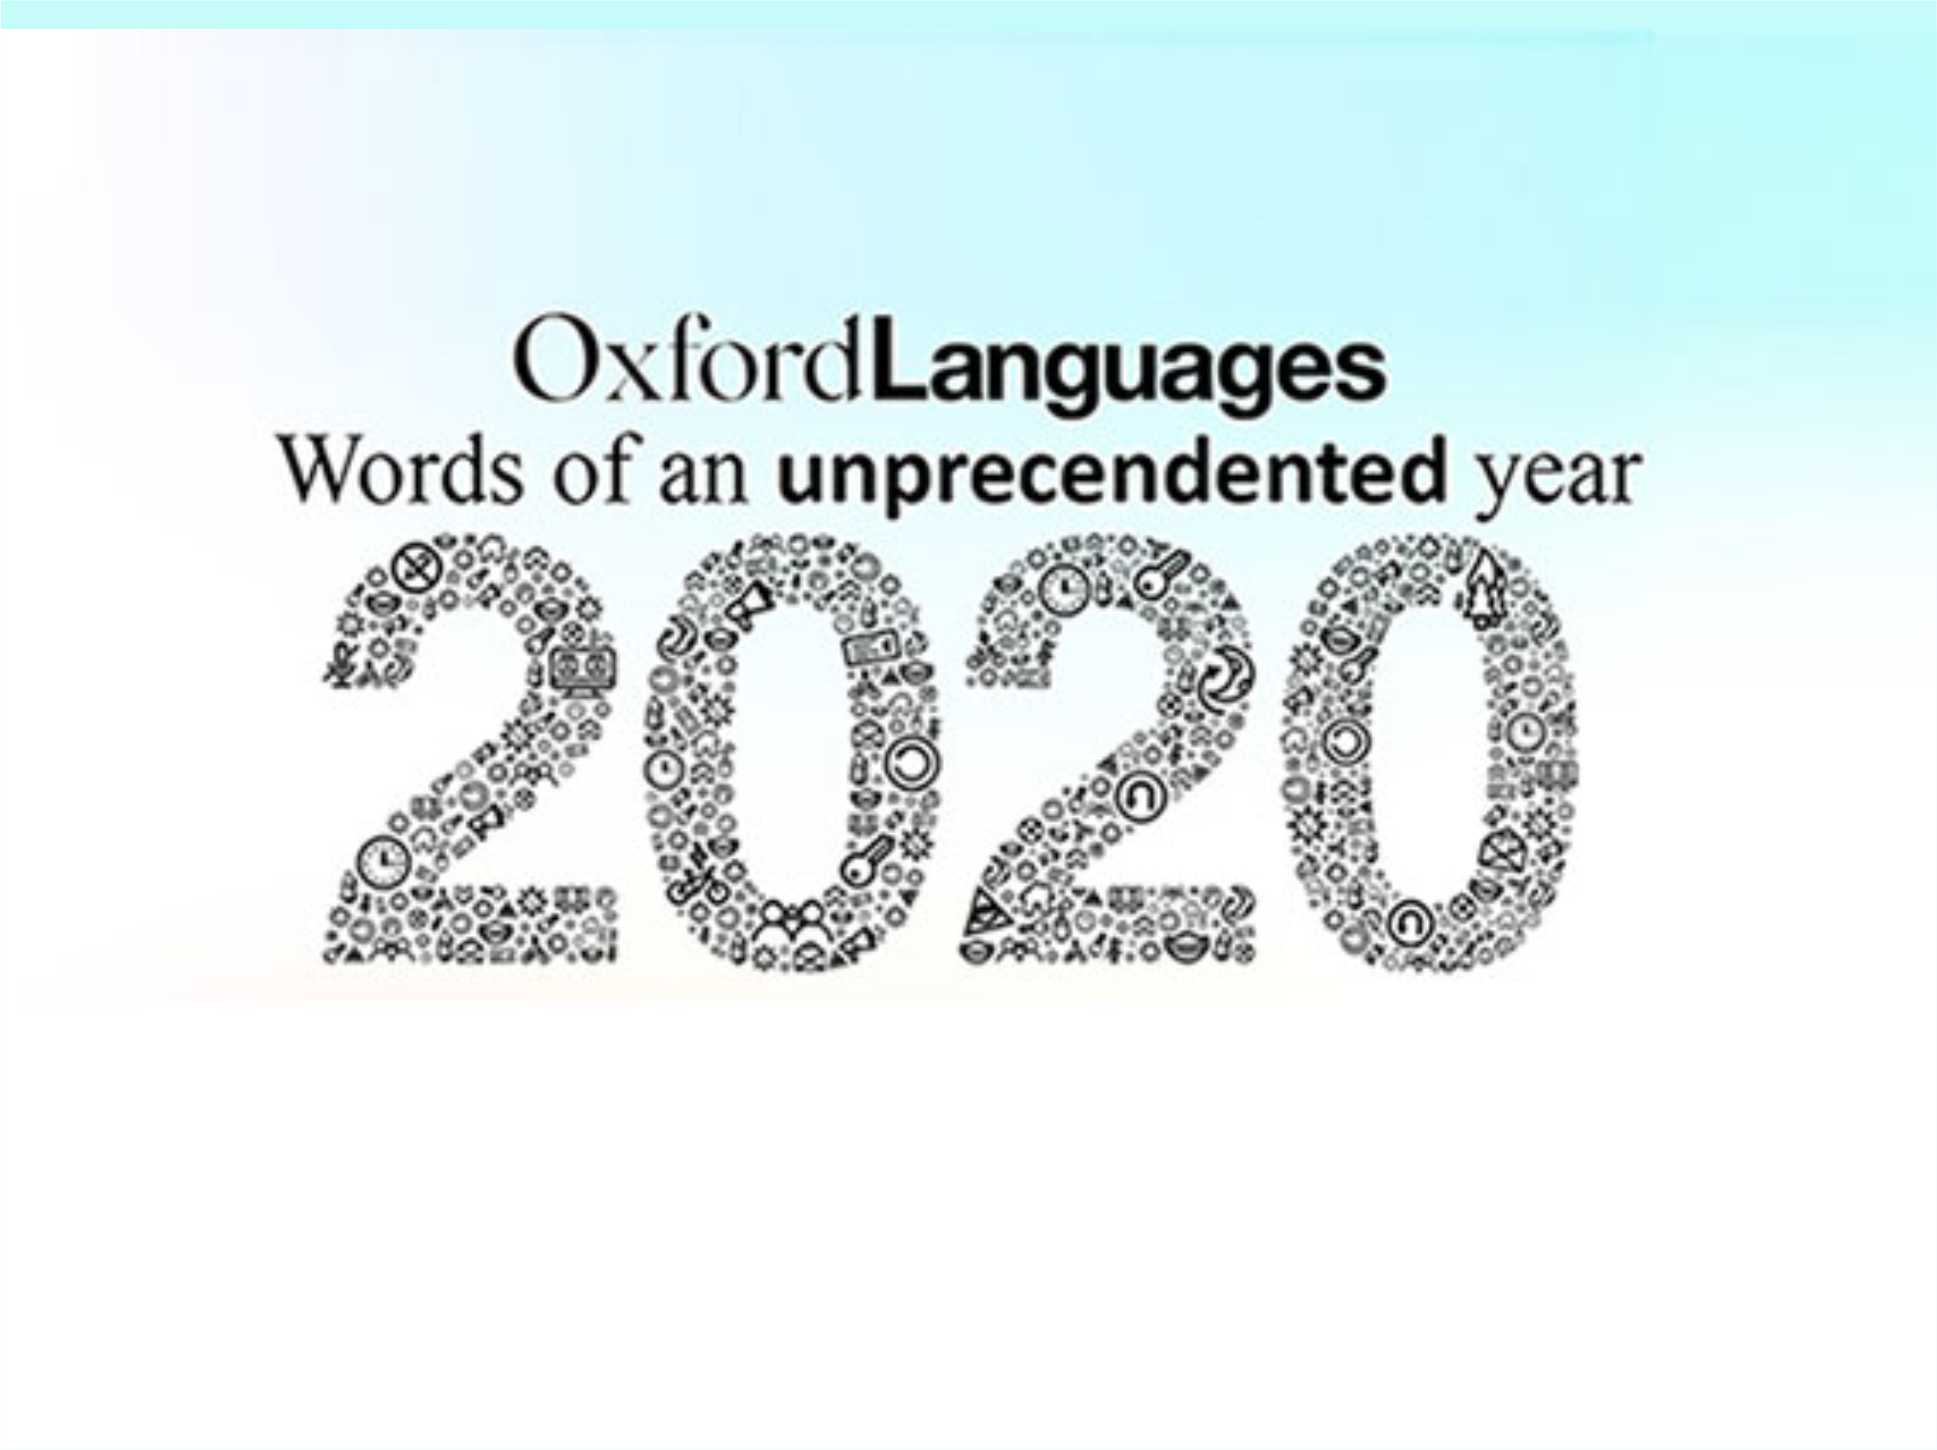 Oxford University ‘Word of the Year’ expands to a whole list to capture